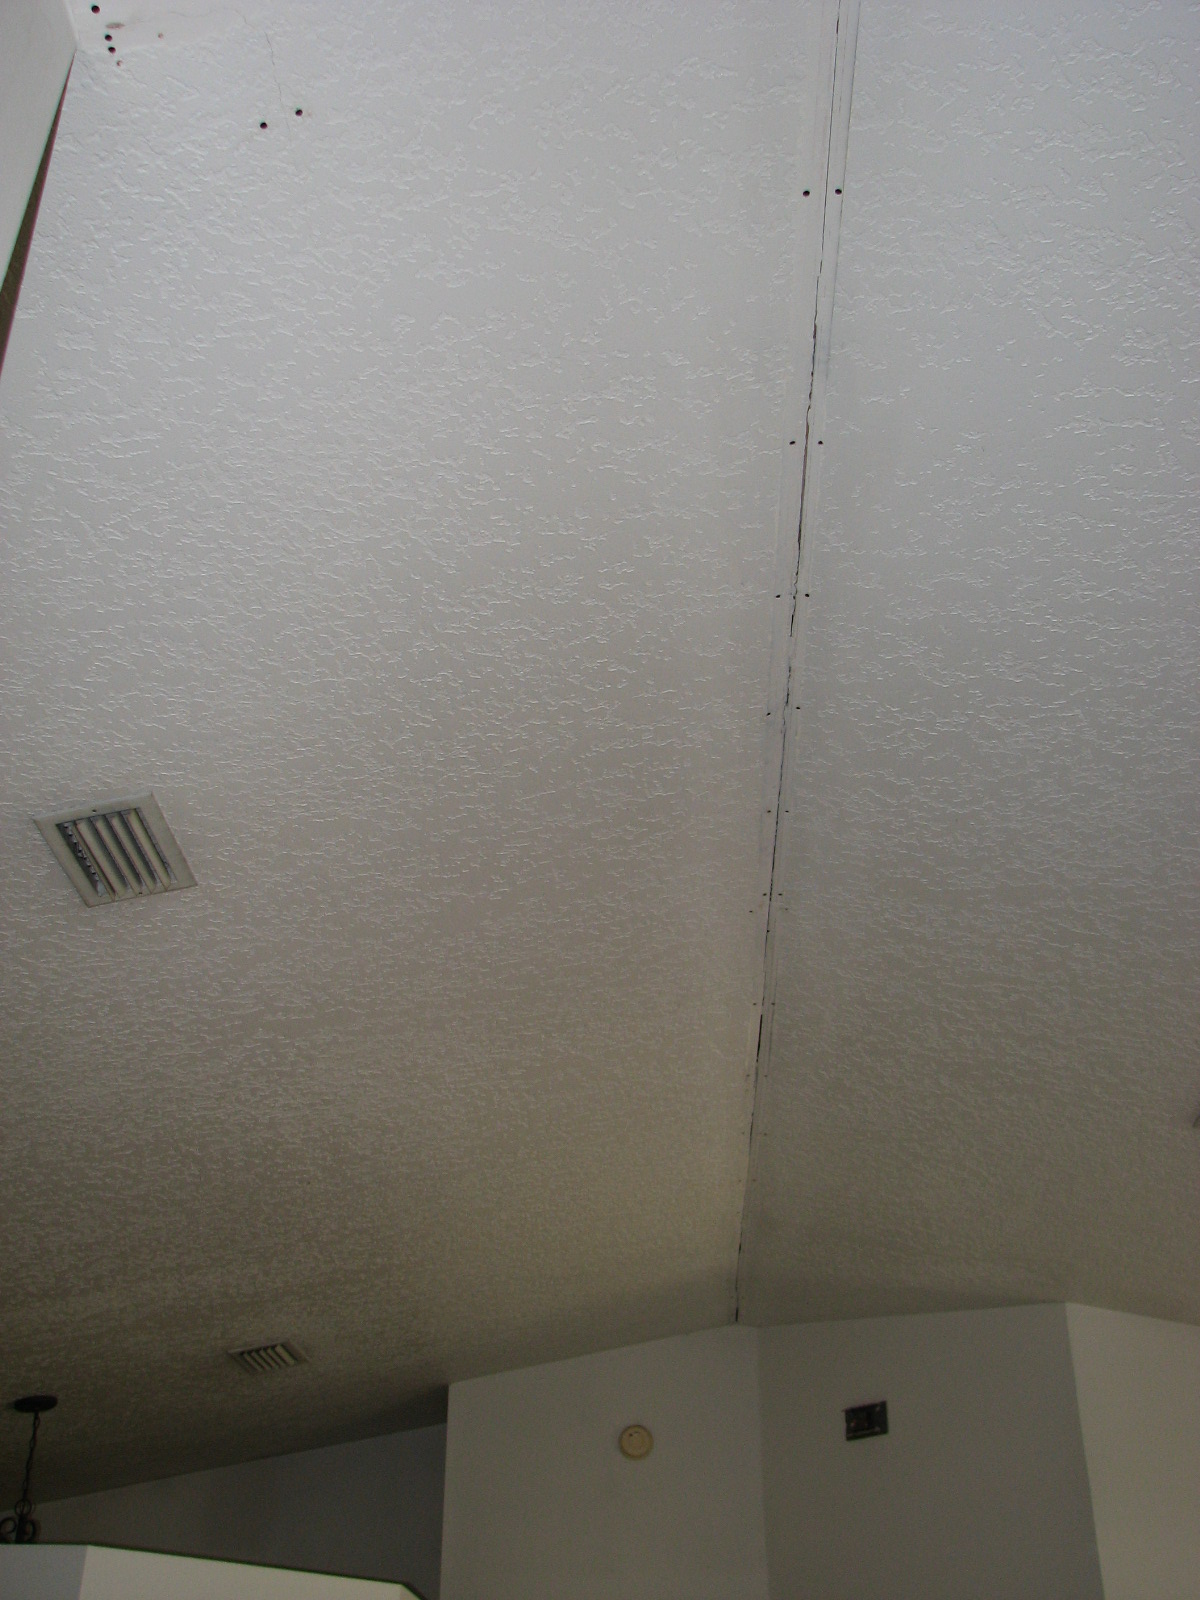 Vaulted Ceiling Tape Joint Repair by Peck Drywall and Painting Interior painting and repairs.